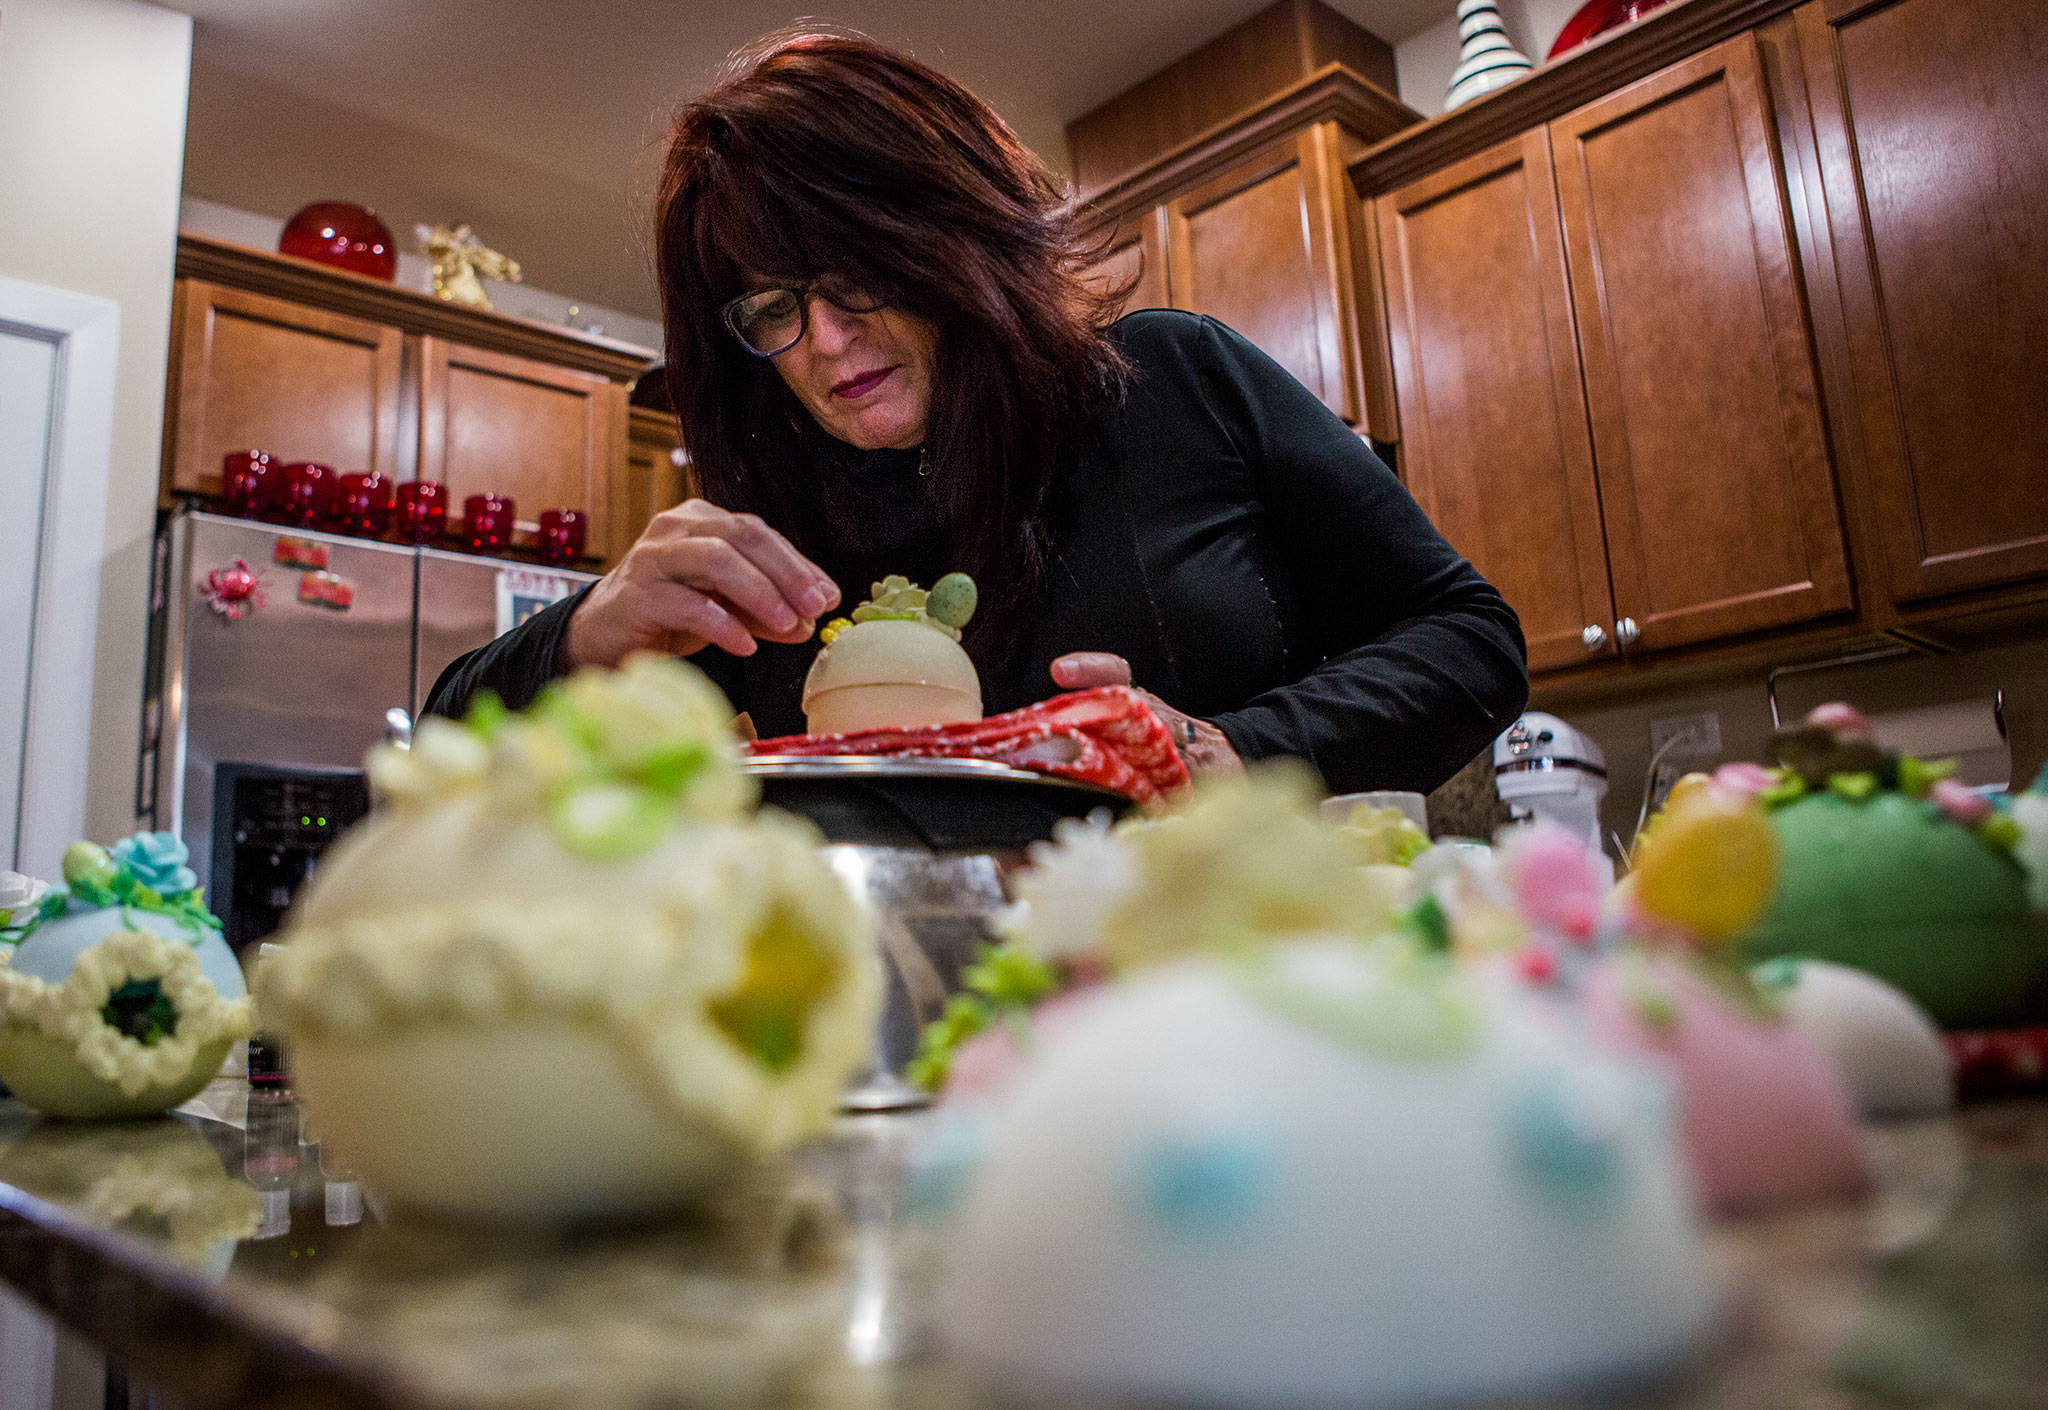 Darla Aiken places celebration pearls on the royal icing designs covering one of her sugar eggs at her home in Lynnwood. (Olivia Vanni / The Herald)